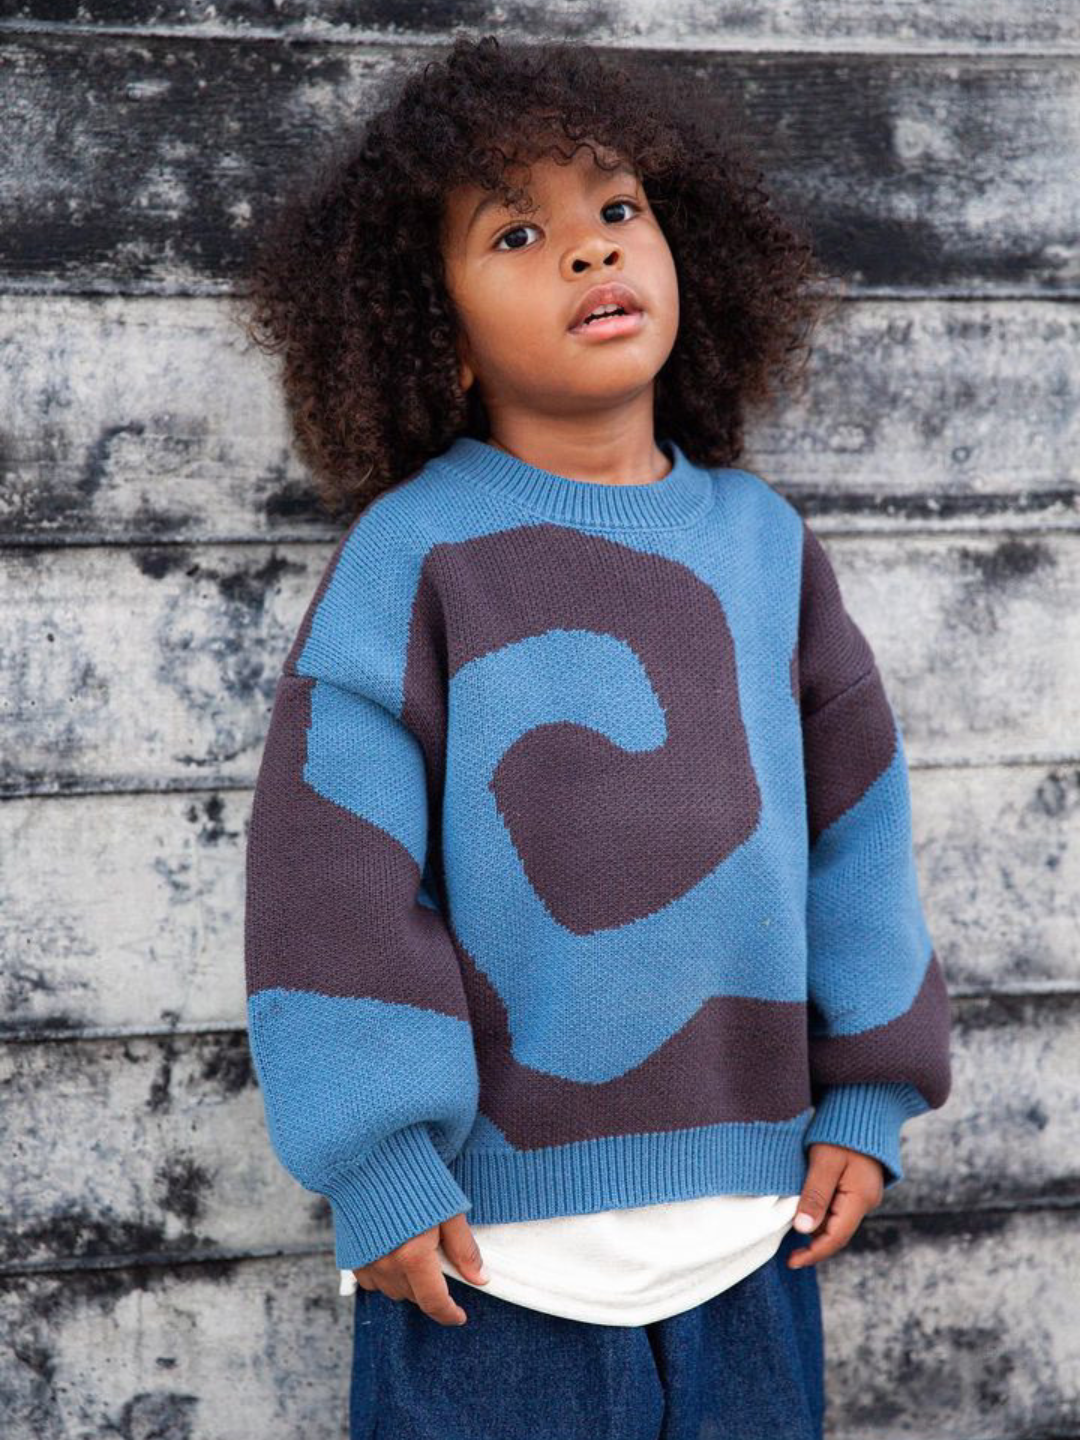 Slate | A child wearing a kids crewneck sweater in medium blue, with a large single charcoal grey swirl design that covers the entire sweater. He is standing against a grey wooden wall and also wears dark blue baggy jeans.